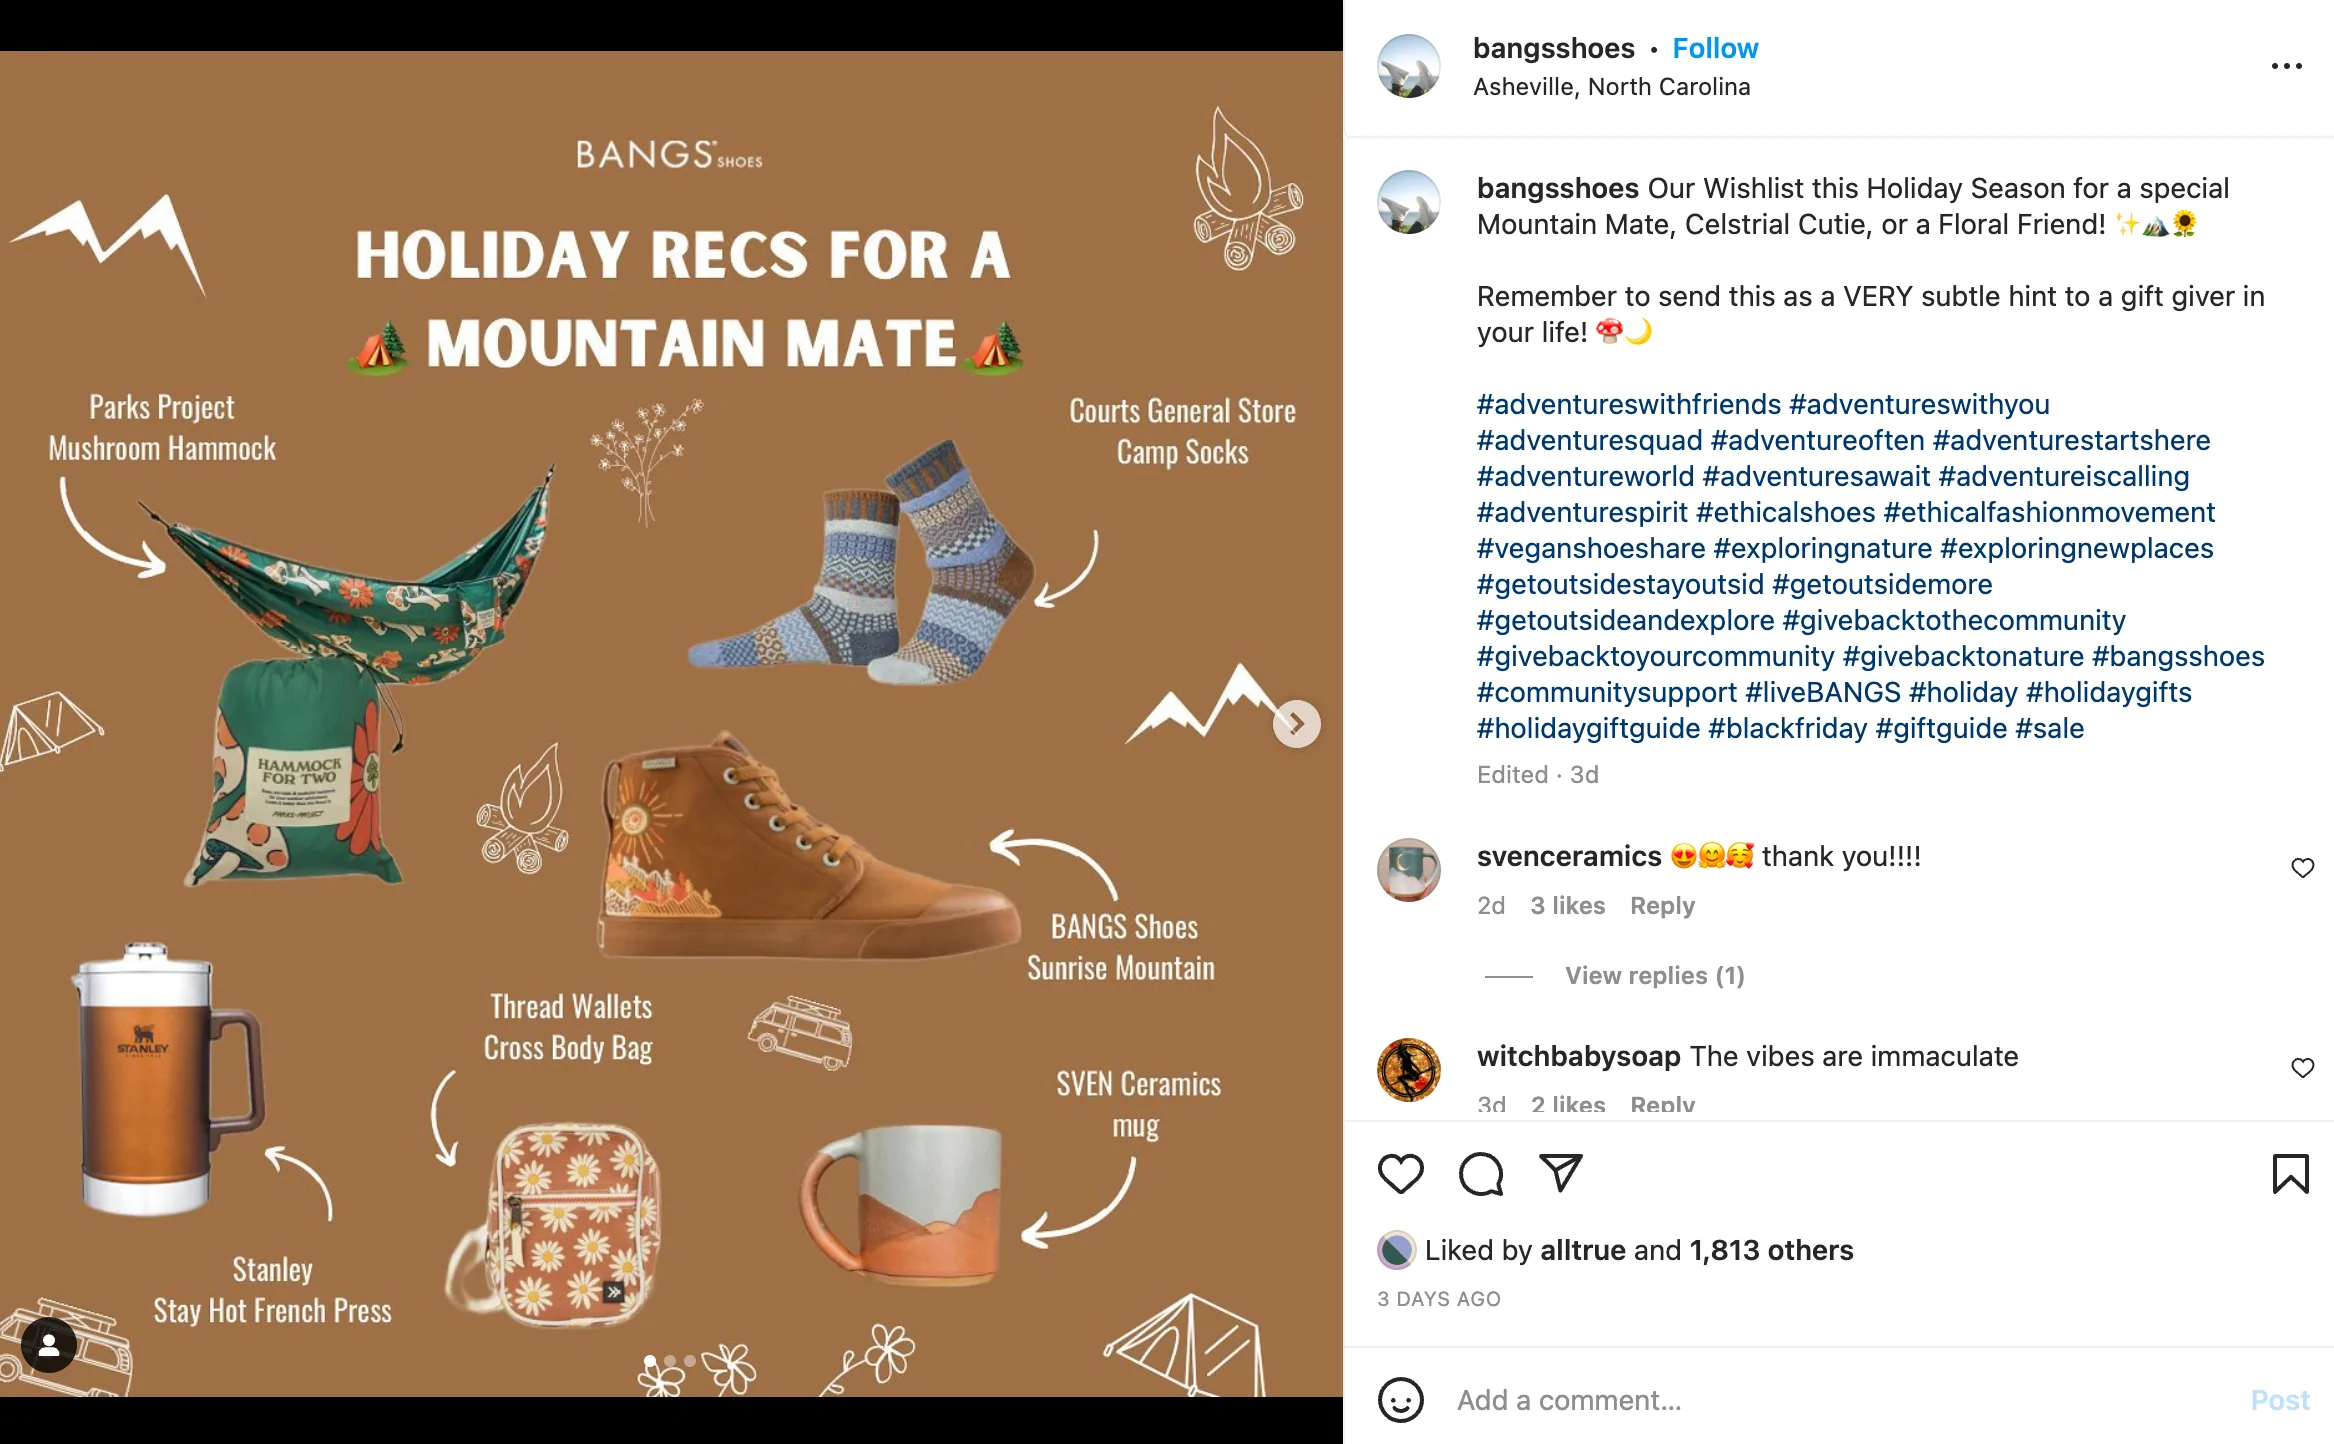 An instragram post from Bangs Shoes featuring a number of products arranged into a gift guide